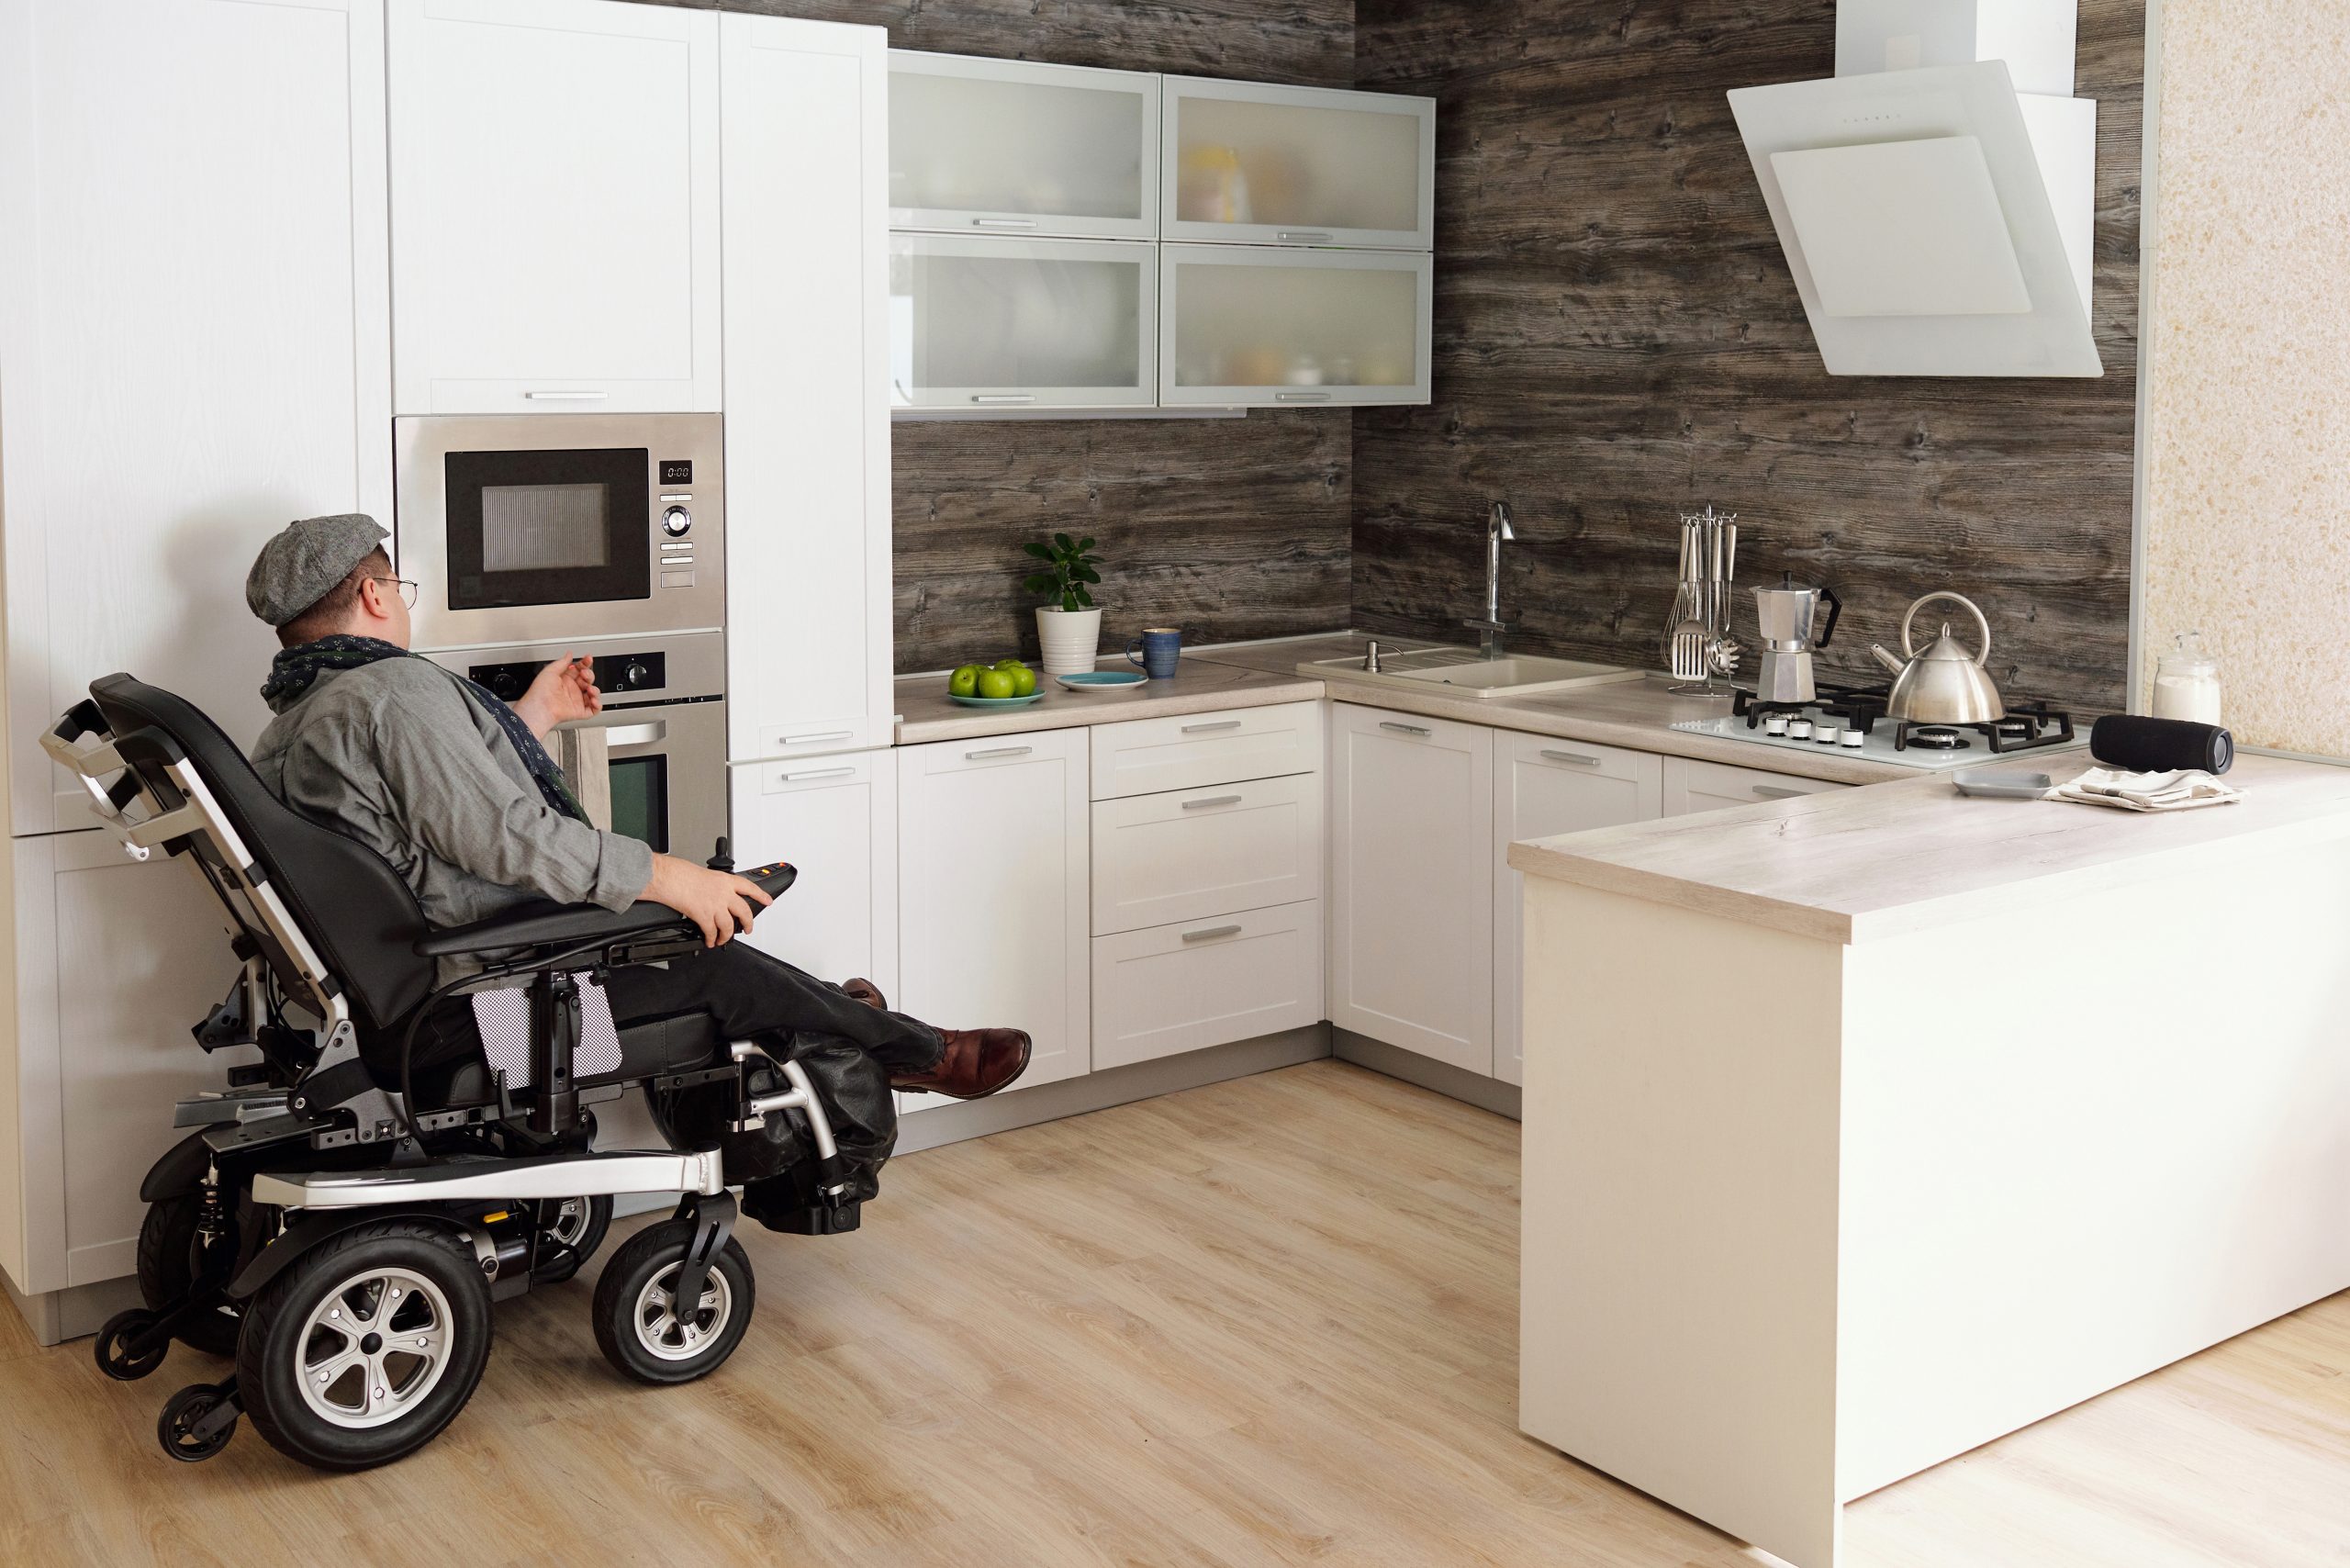 Man in a wheelchair using a cooker